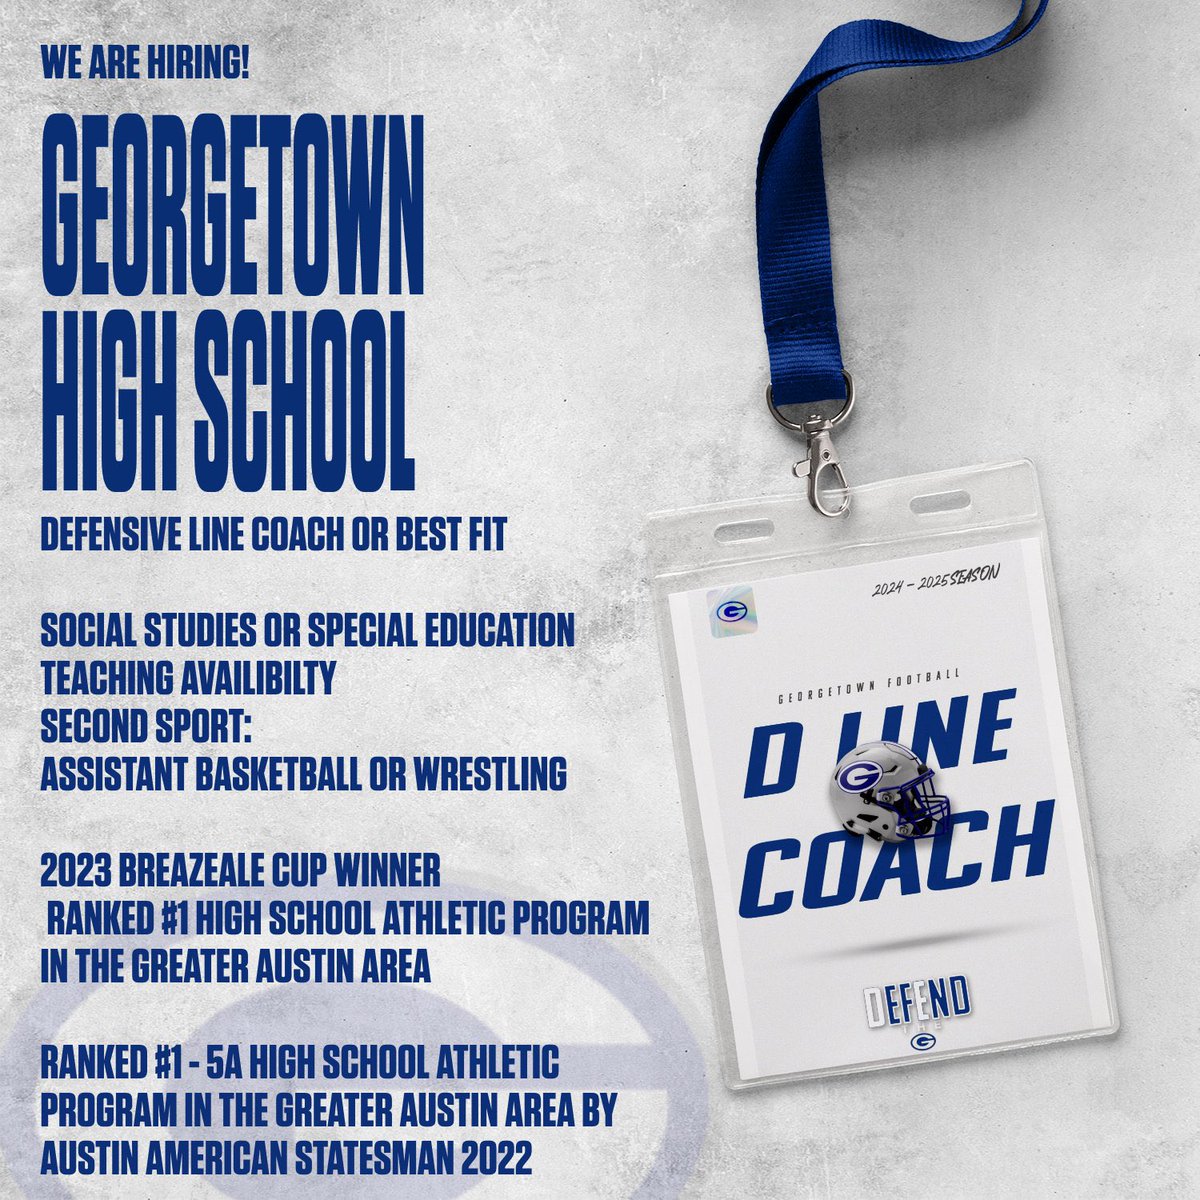 ✅ Amazing kids and leaders! ✅ Great Staff and atmosphere! ✅ Supportive administration and community! Join the Georgetown Eagle Family now! #EFND @Matt_Stepp817